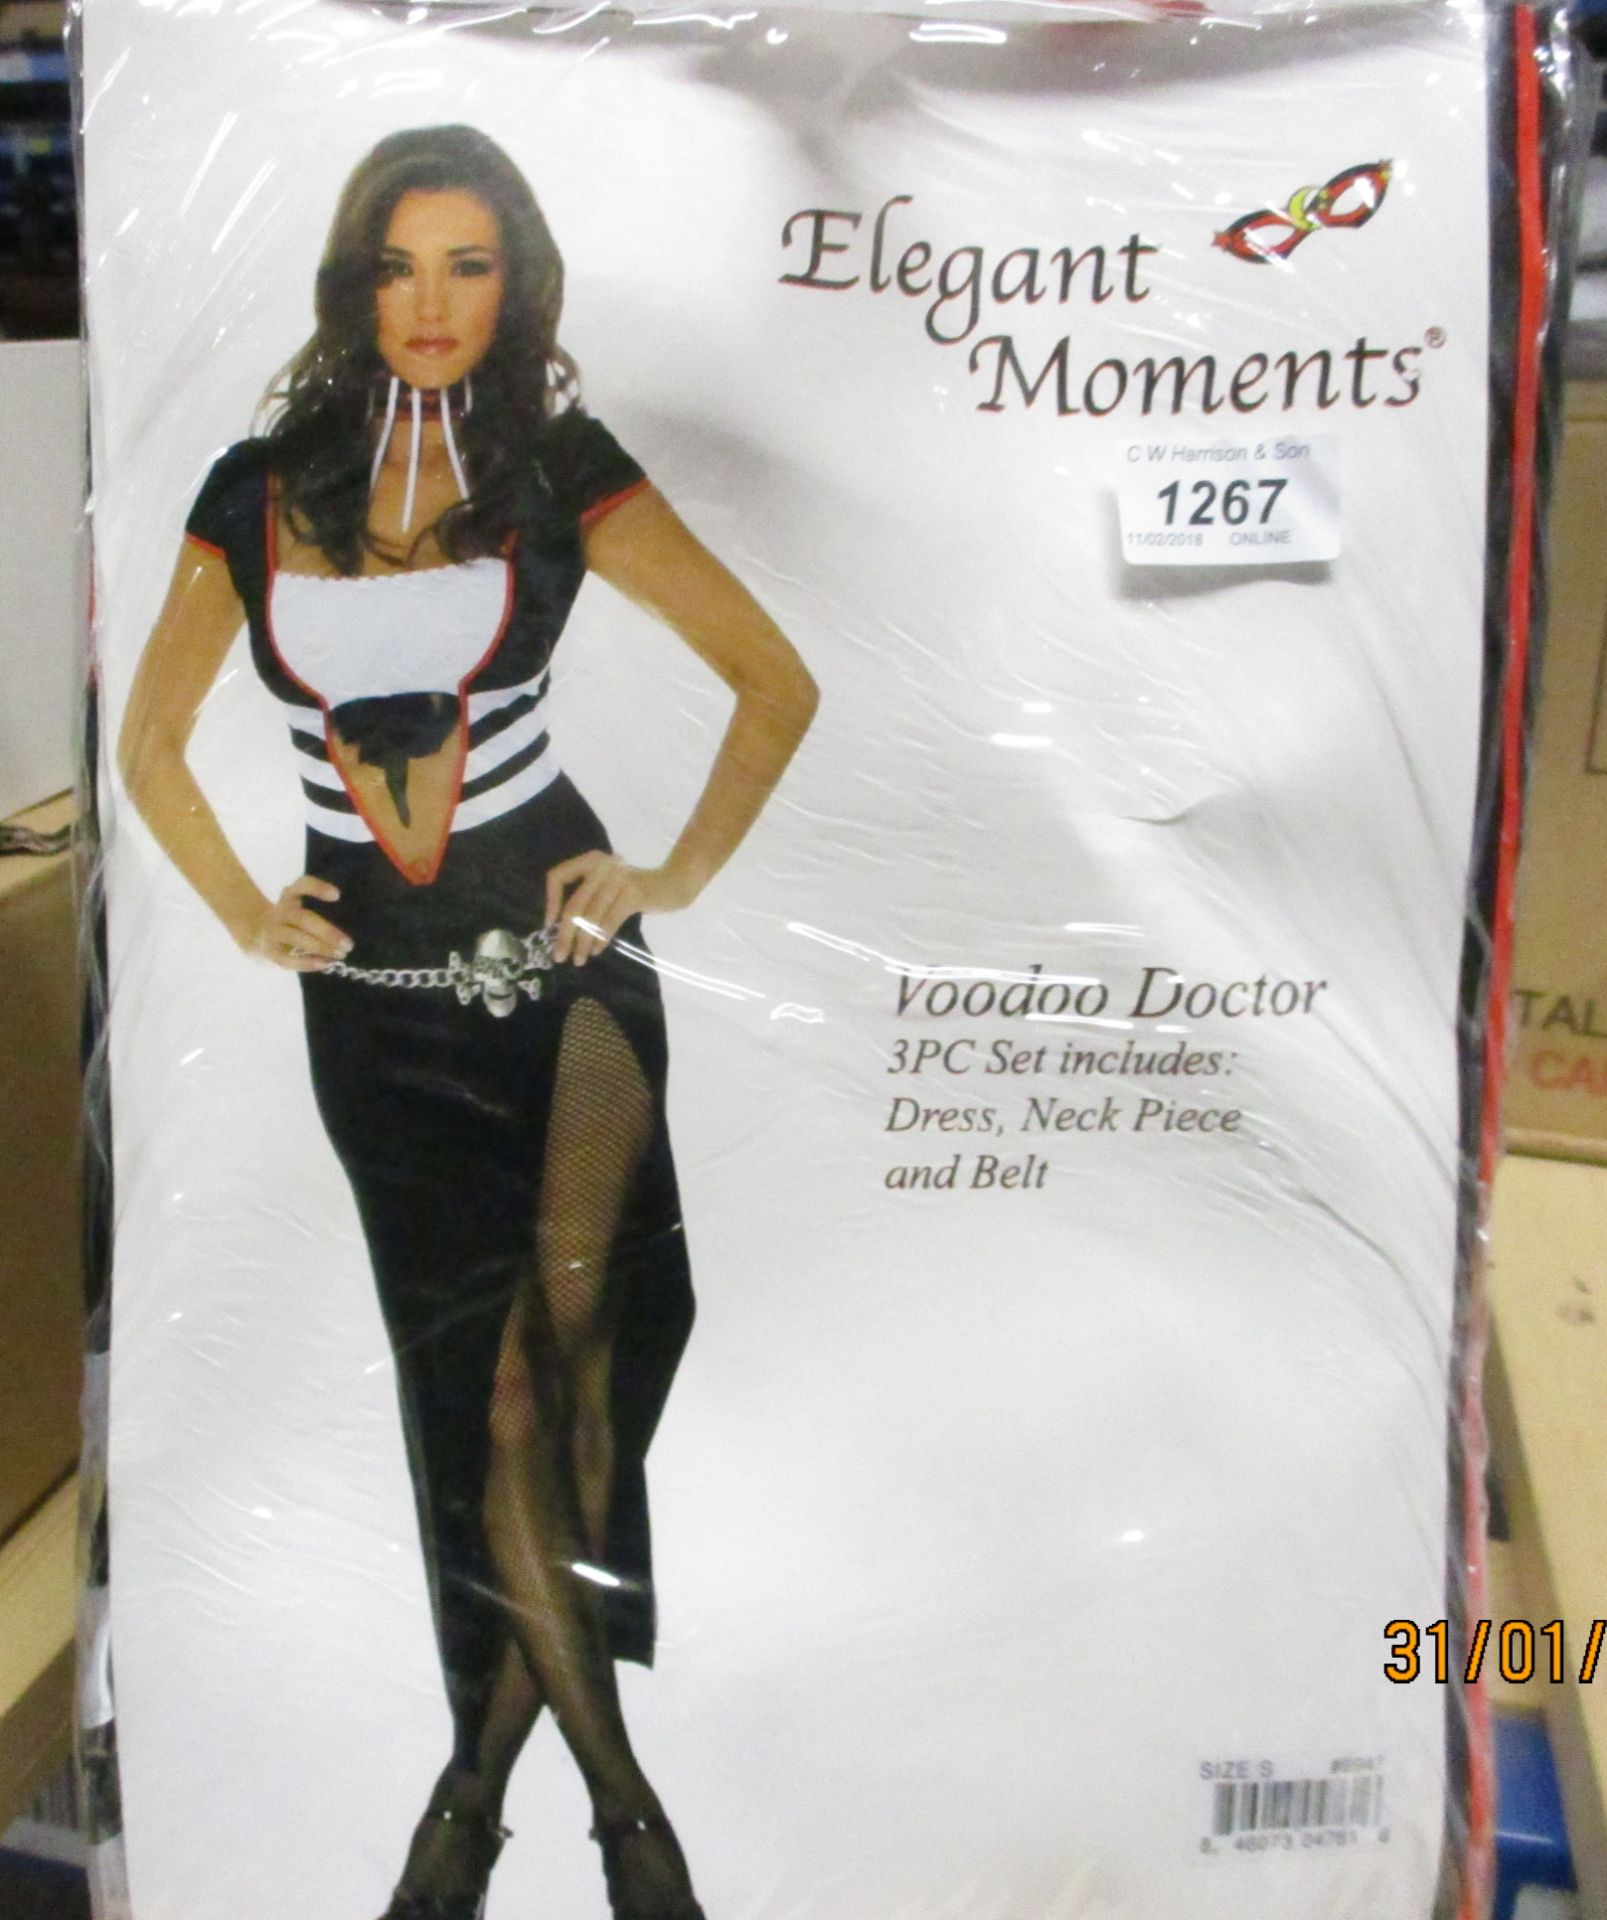 11 x Elegant Moments ladies Voodoo Doctor fancy dress costumes (all size S) - box not included